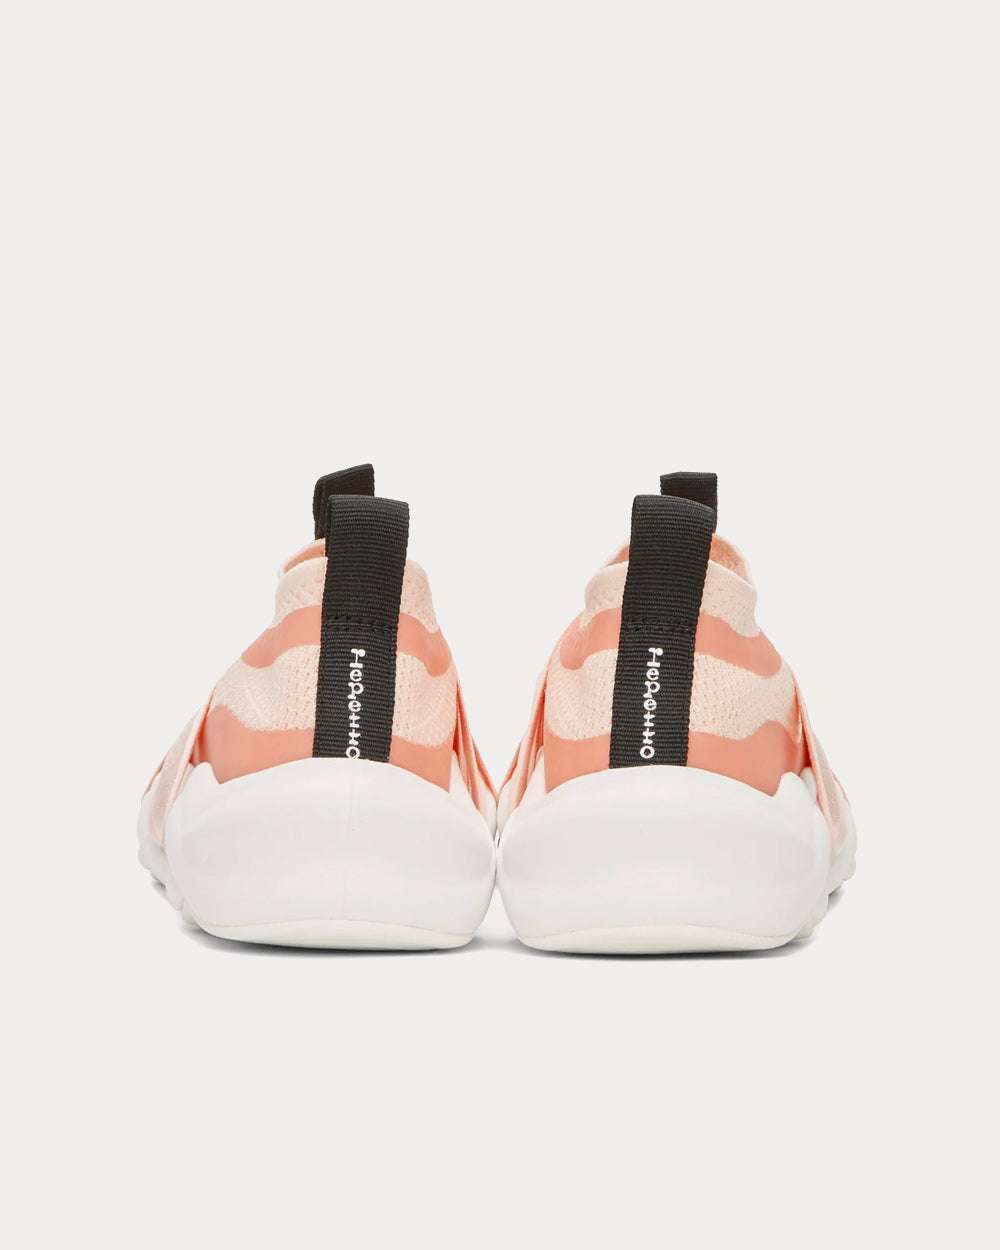 Repetto - Ruban Pink Low Top Sneakers